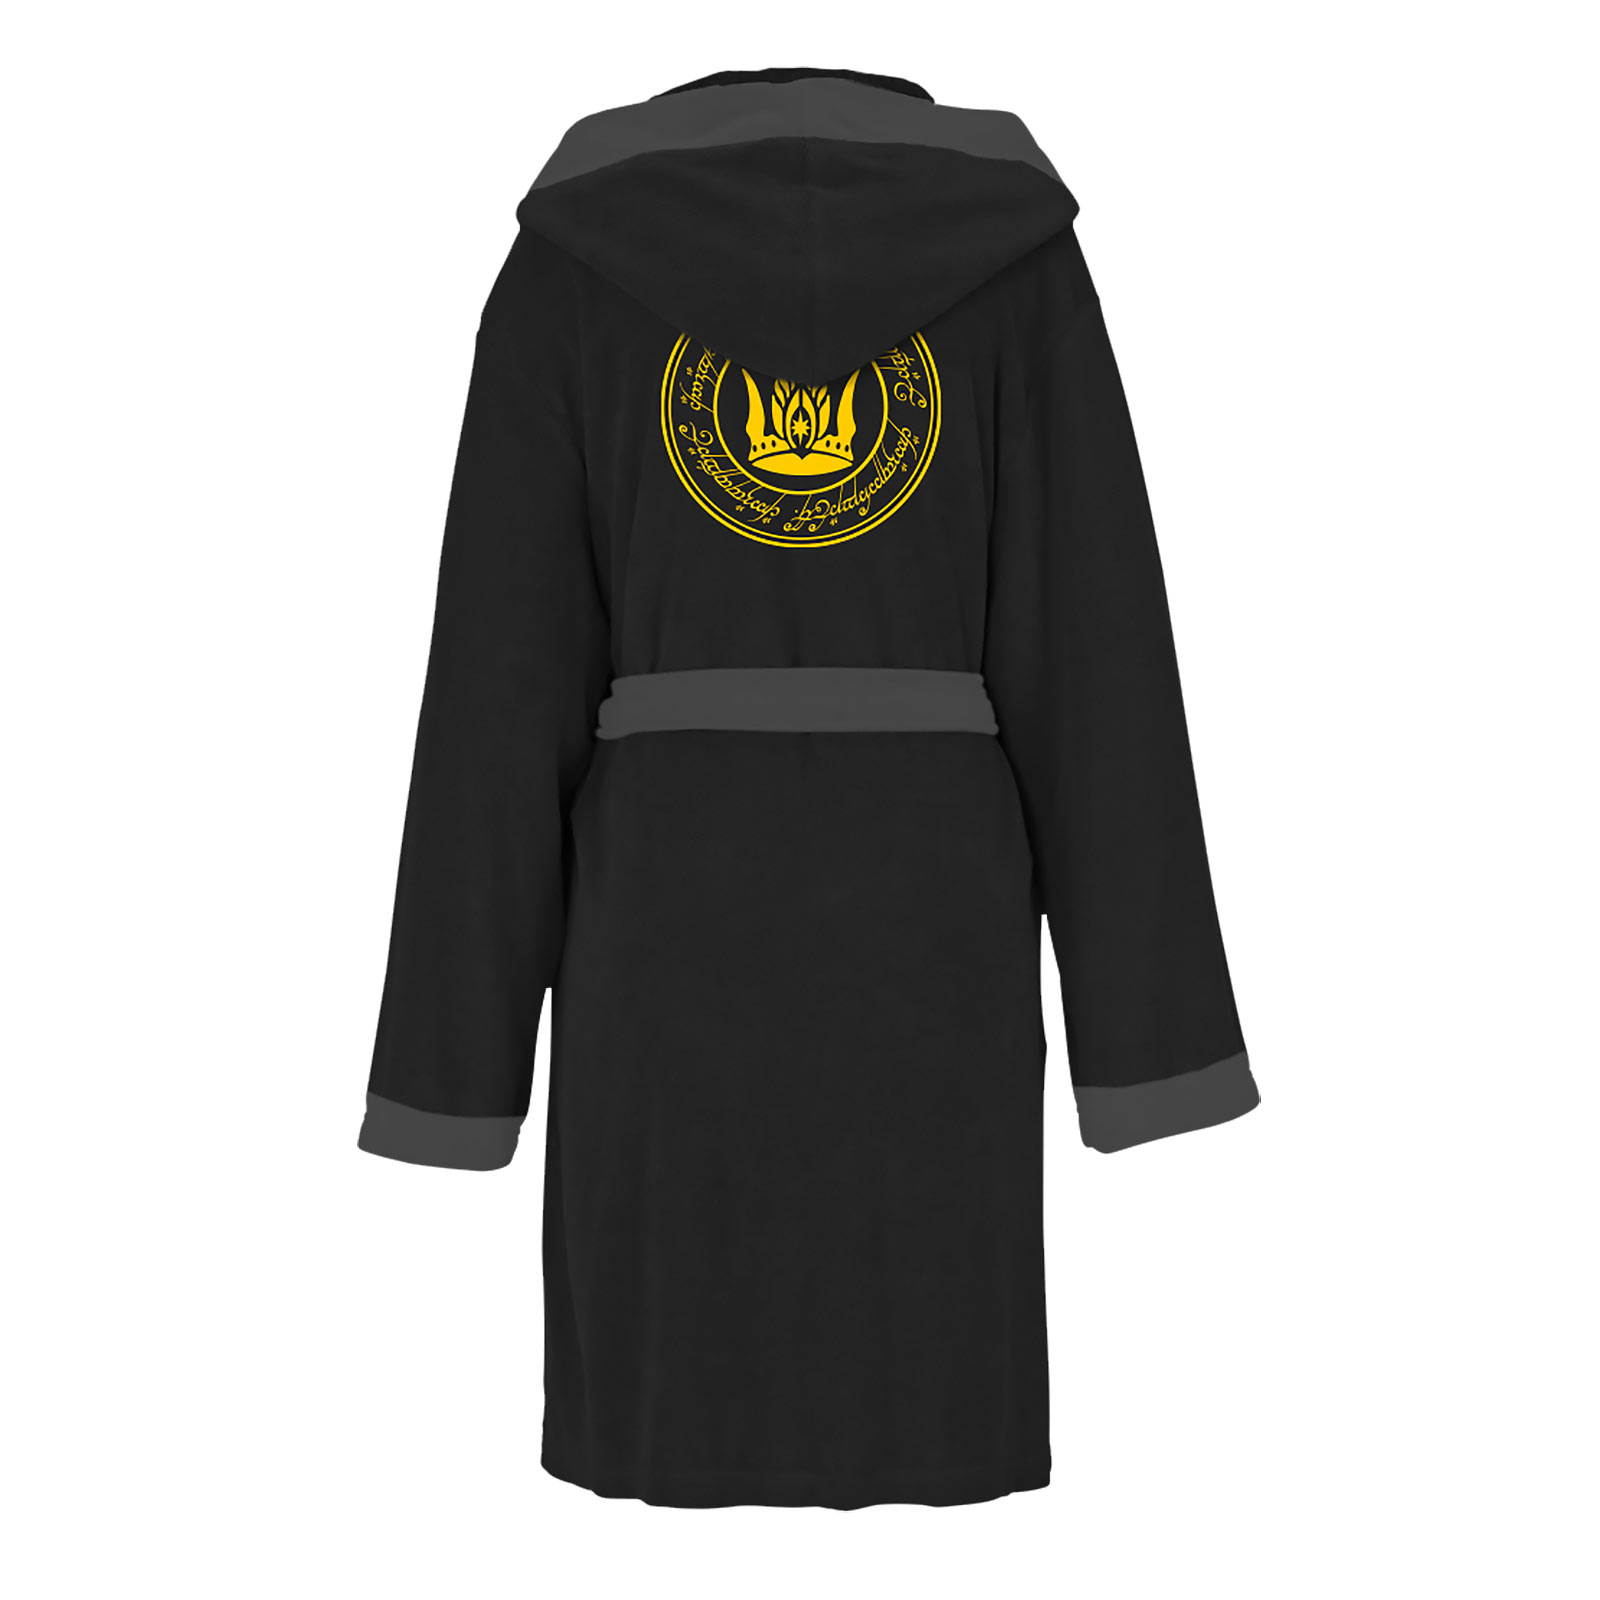 Together for Gondor Bathrobe - Lord of the Rings